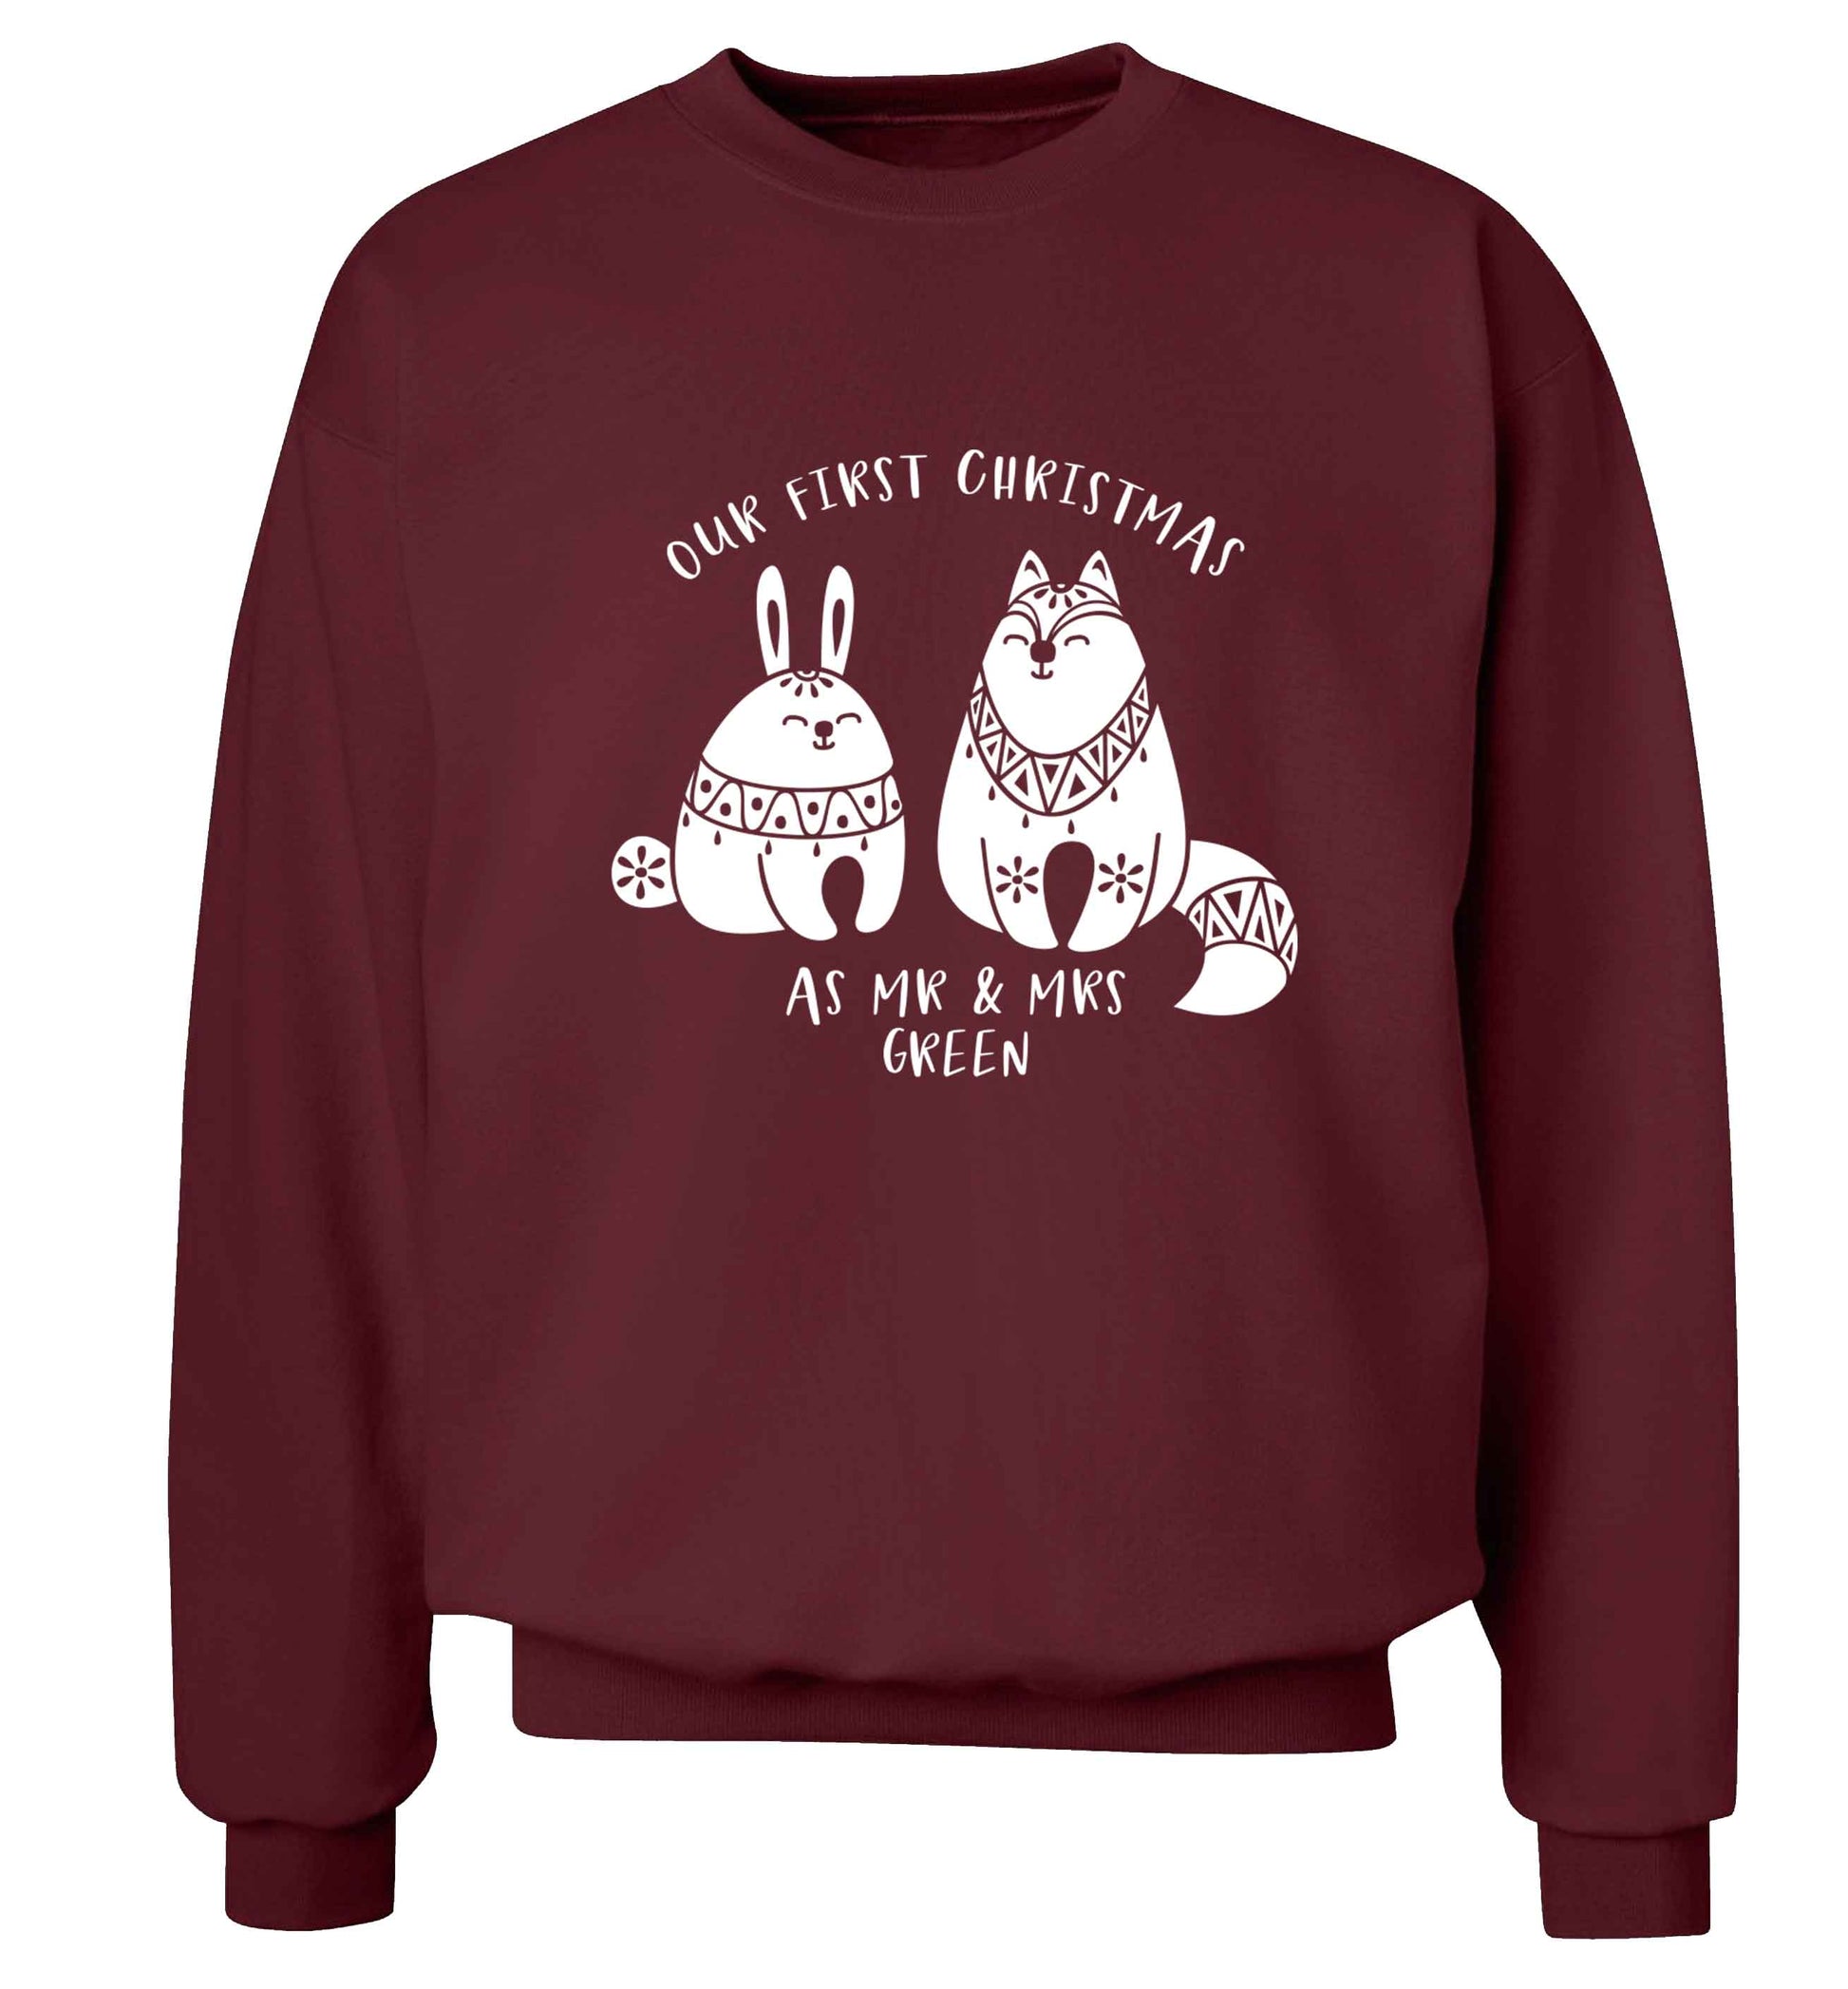 Our first Christmas as Mr & Mrs personalised Adult's unisex maroon Sweater 2XL